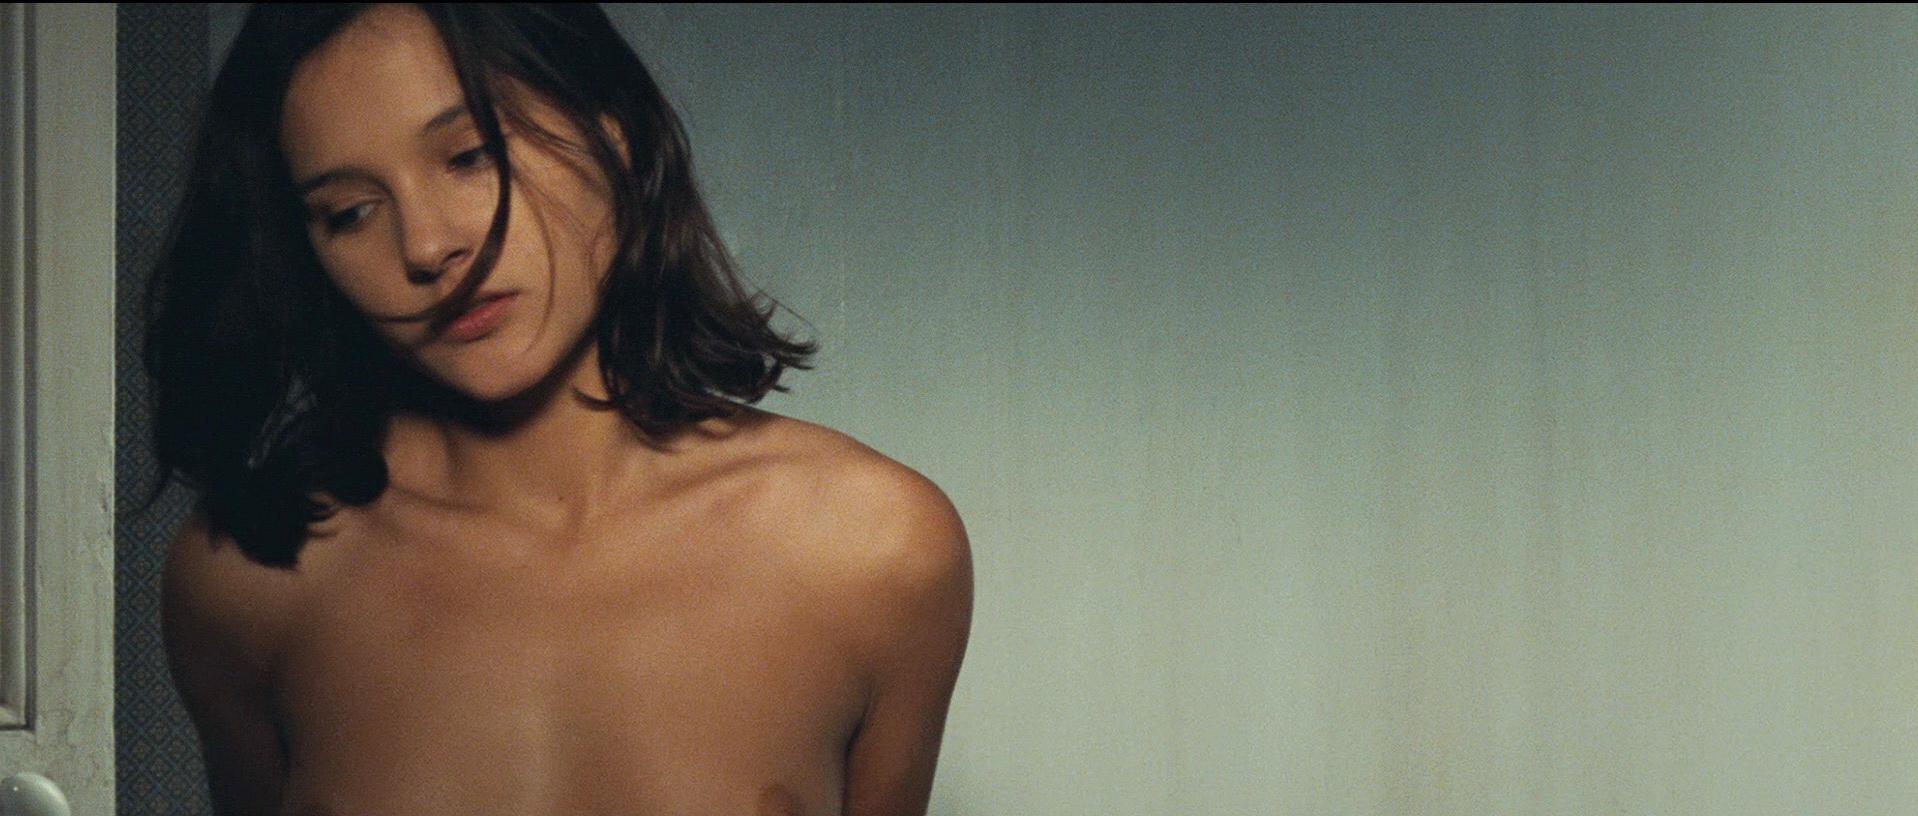 Virginie Ledoyen in nude scene from Heroines which was released in 1997. She shows us her tits, butt and bush.   